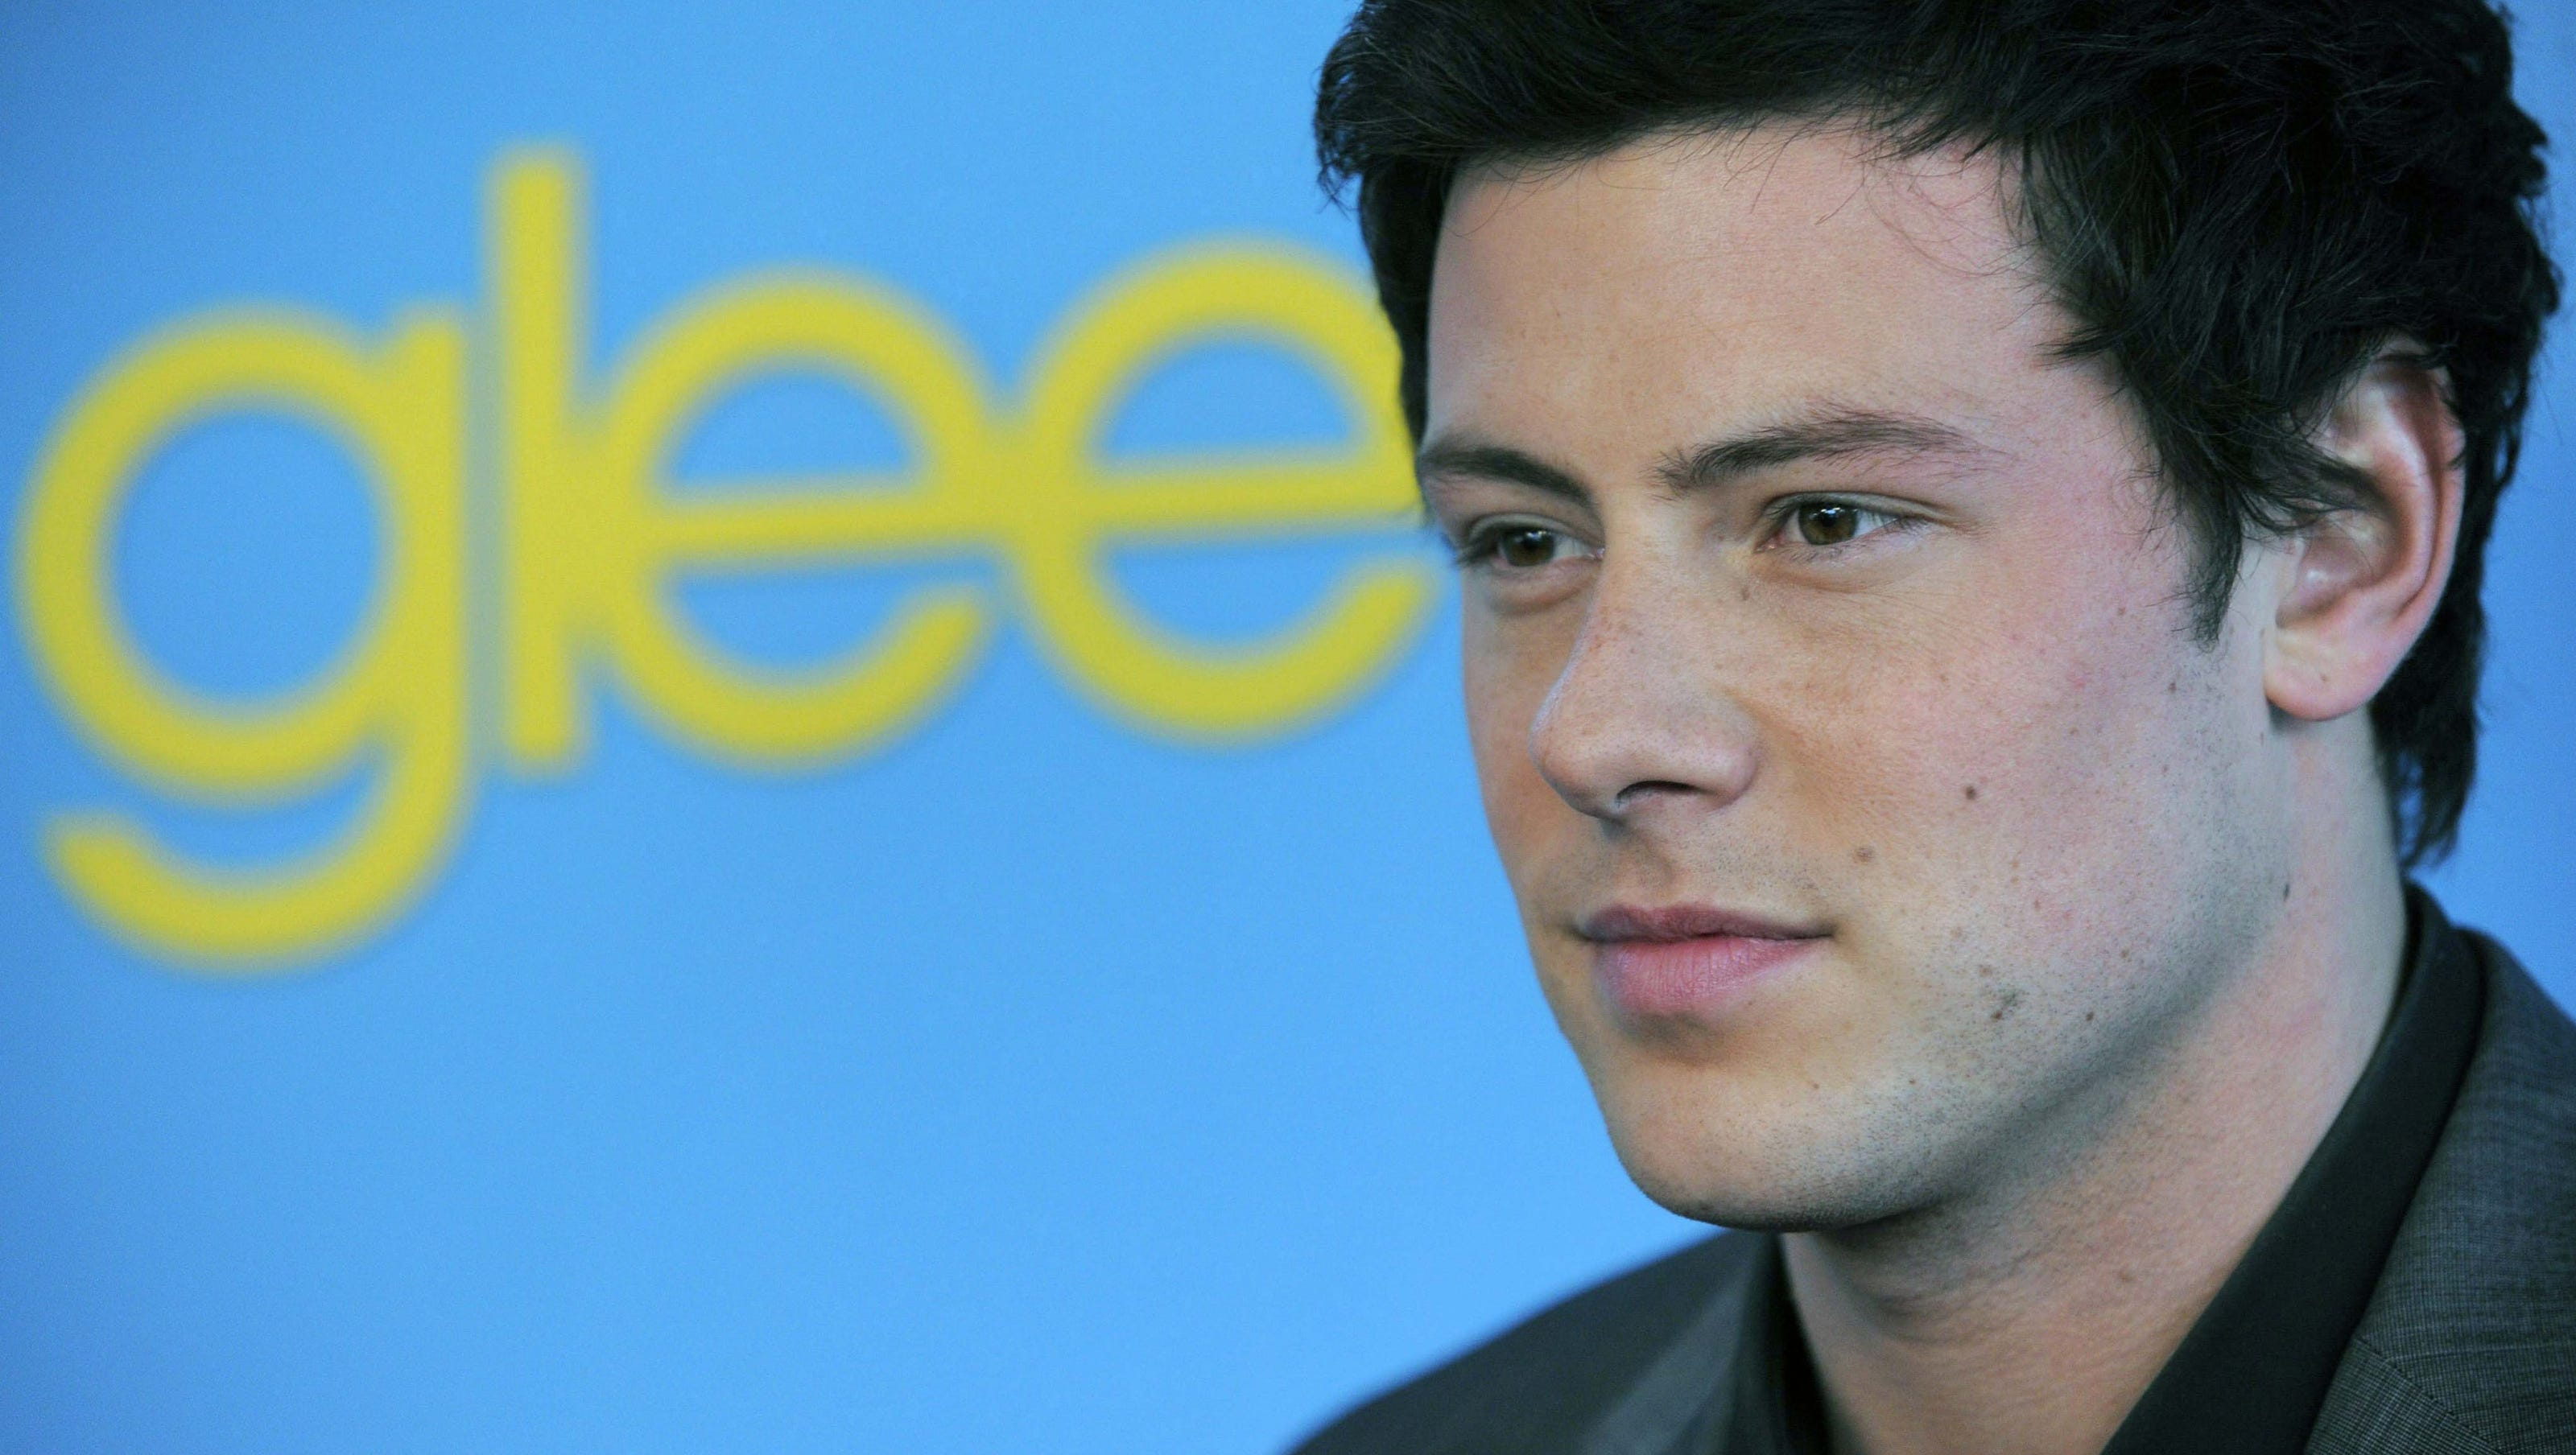 Glee' actor Mike O'Malley says Cory Monteith was show's leader